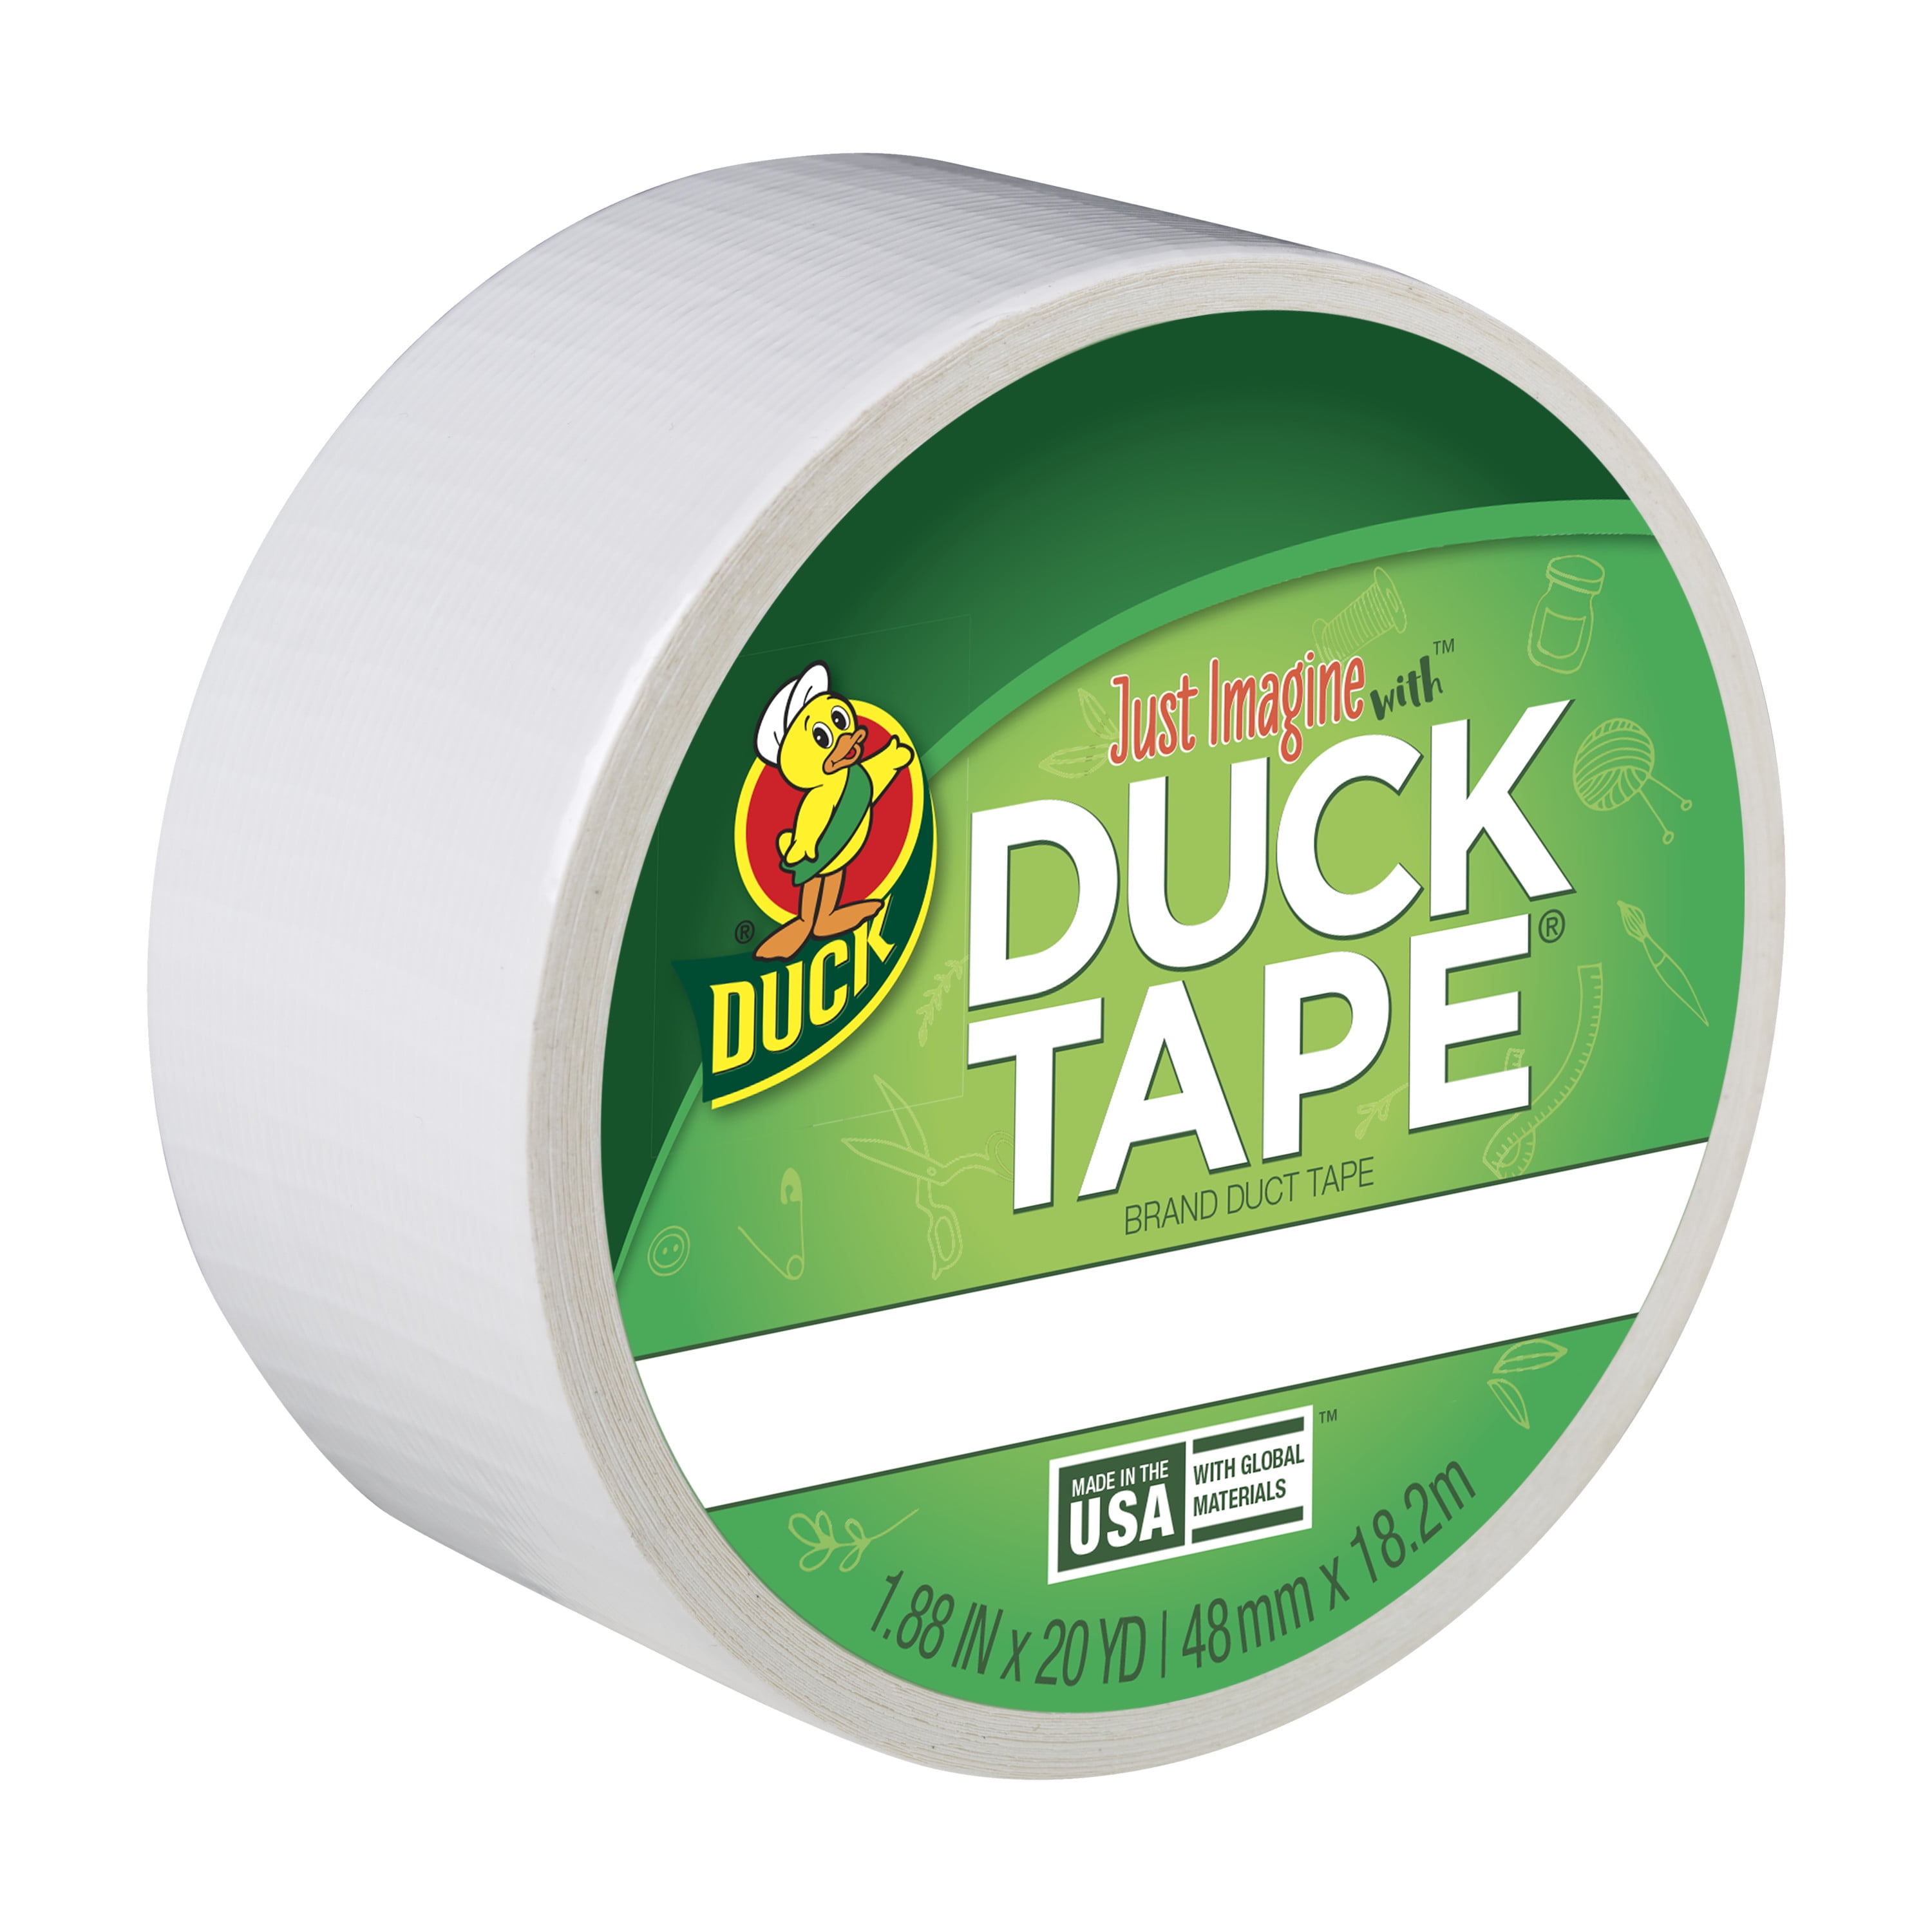 Duck Tape Brand Duct Tape - 1.88 In x 20 Yds White